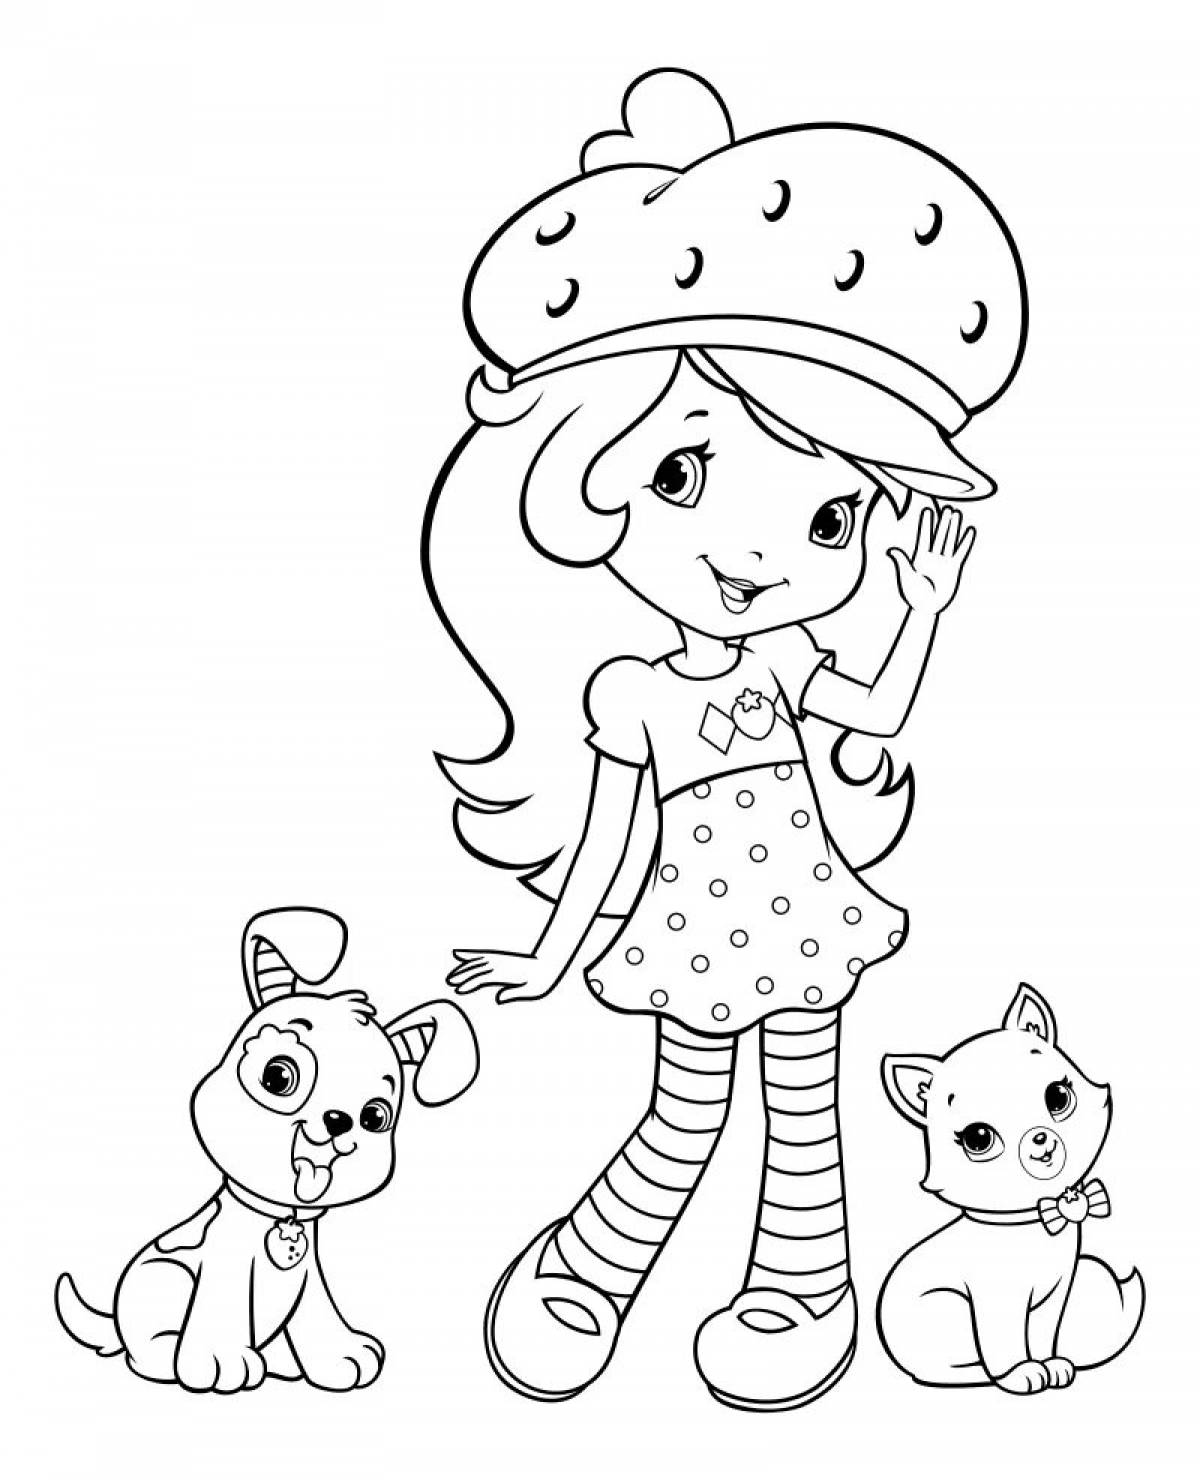 Amazing charlotte strawberry coloring pages for girls